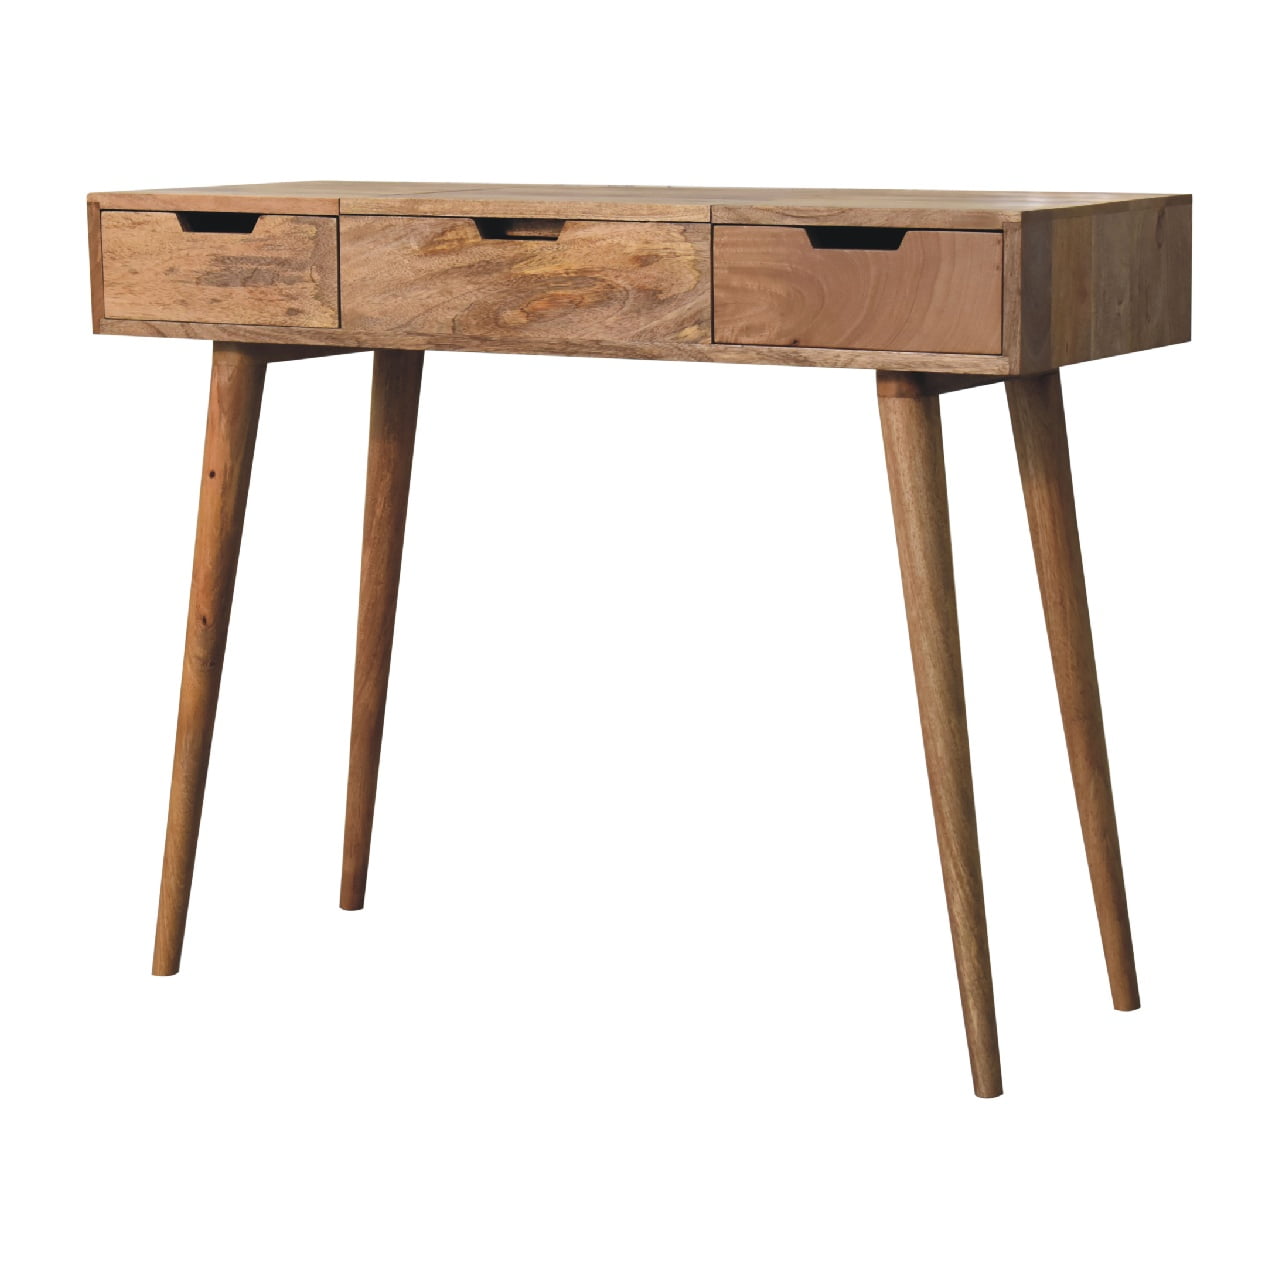 Oak-ish Dressing Table with Foldable Mirror - CasaFenix